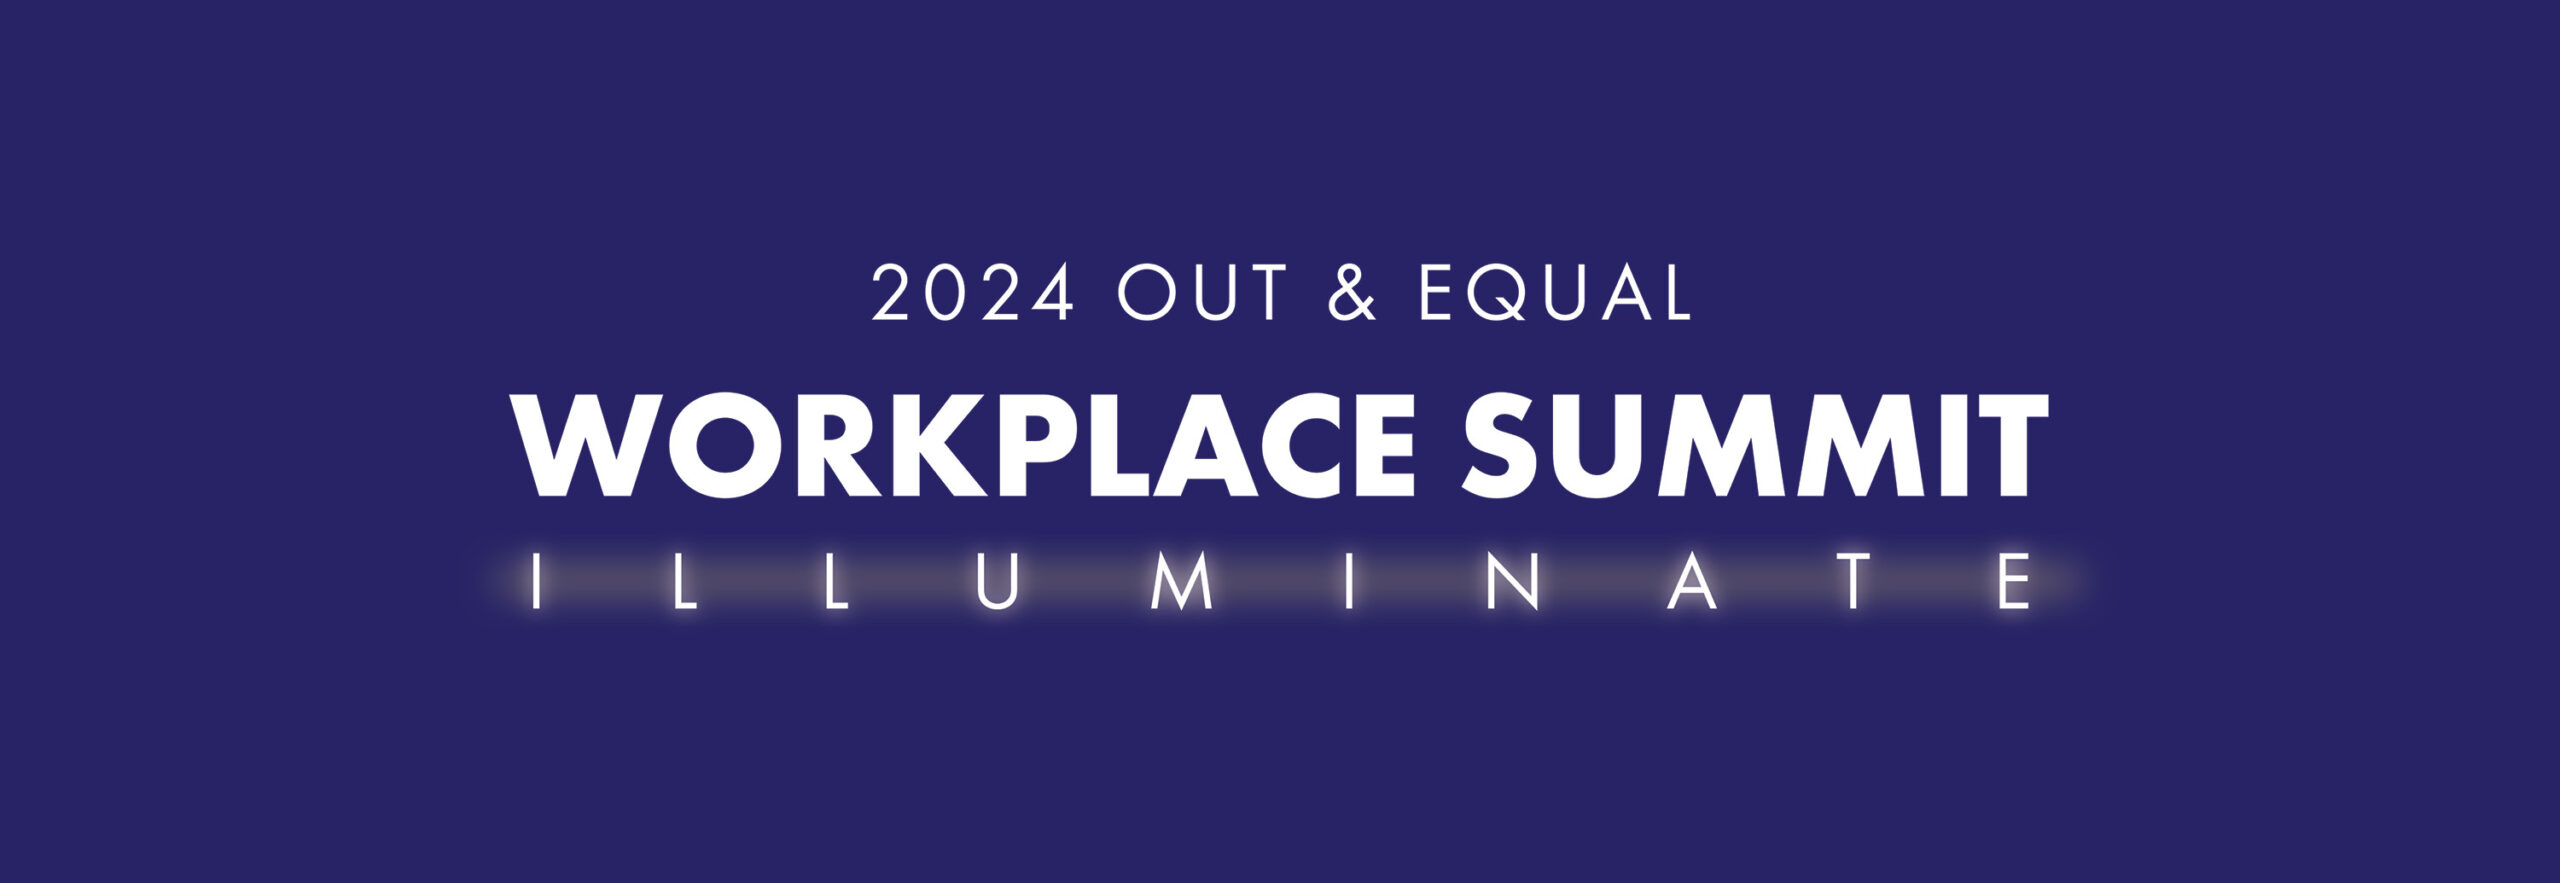 2024 Out & Equal Workplace Summit Out & Equal